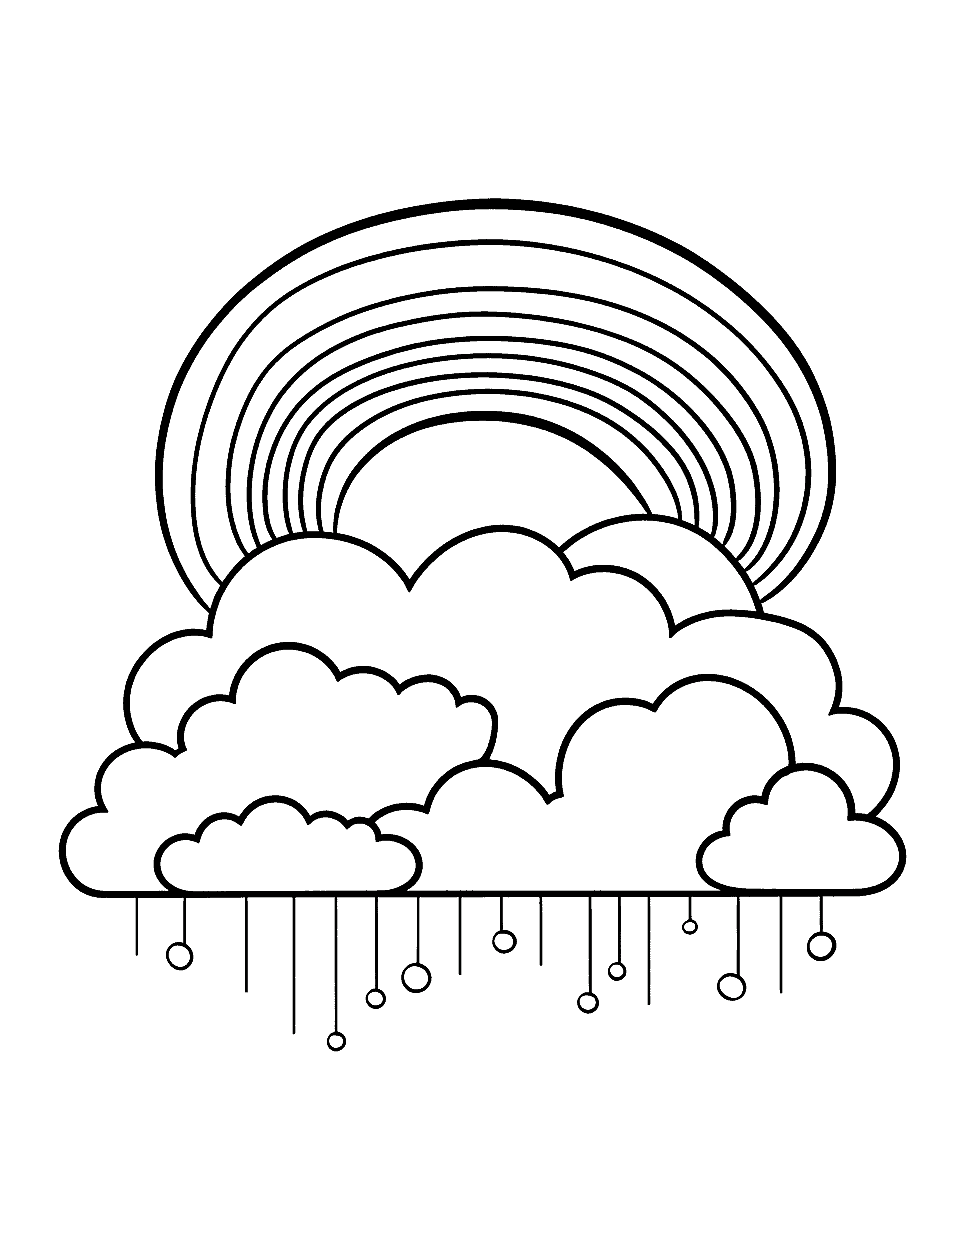 Cloudy Rainbow Coloring Page - Fluffy clouds and a bright rainbow to teach kids about the weather in a fun way.